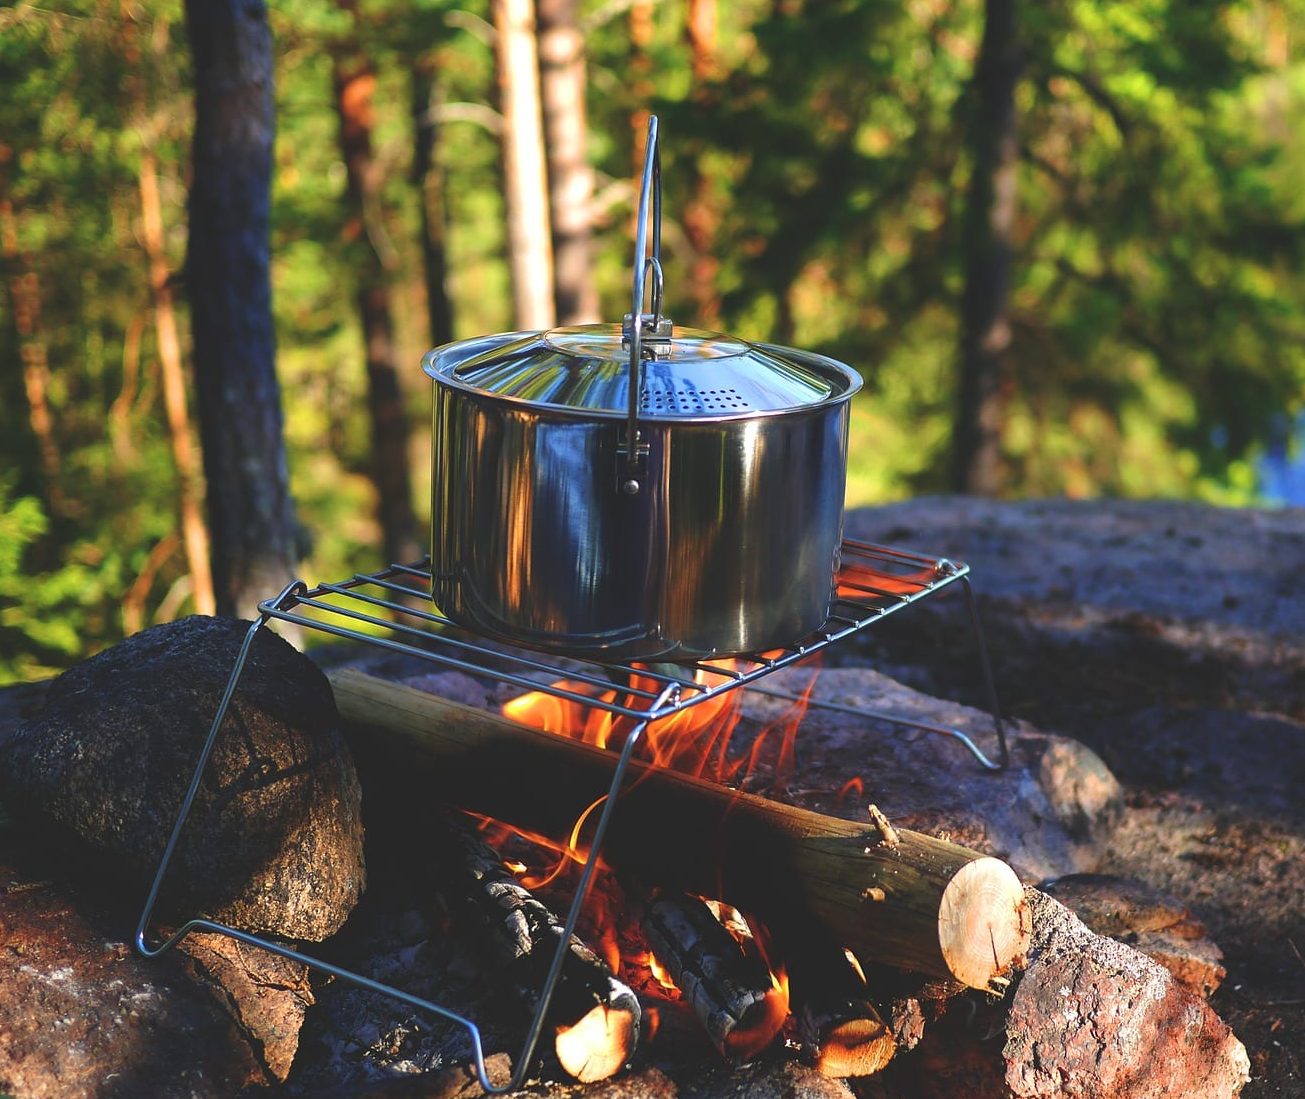 How to cook over a campfire